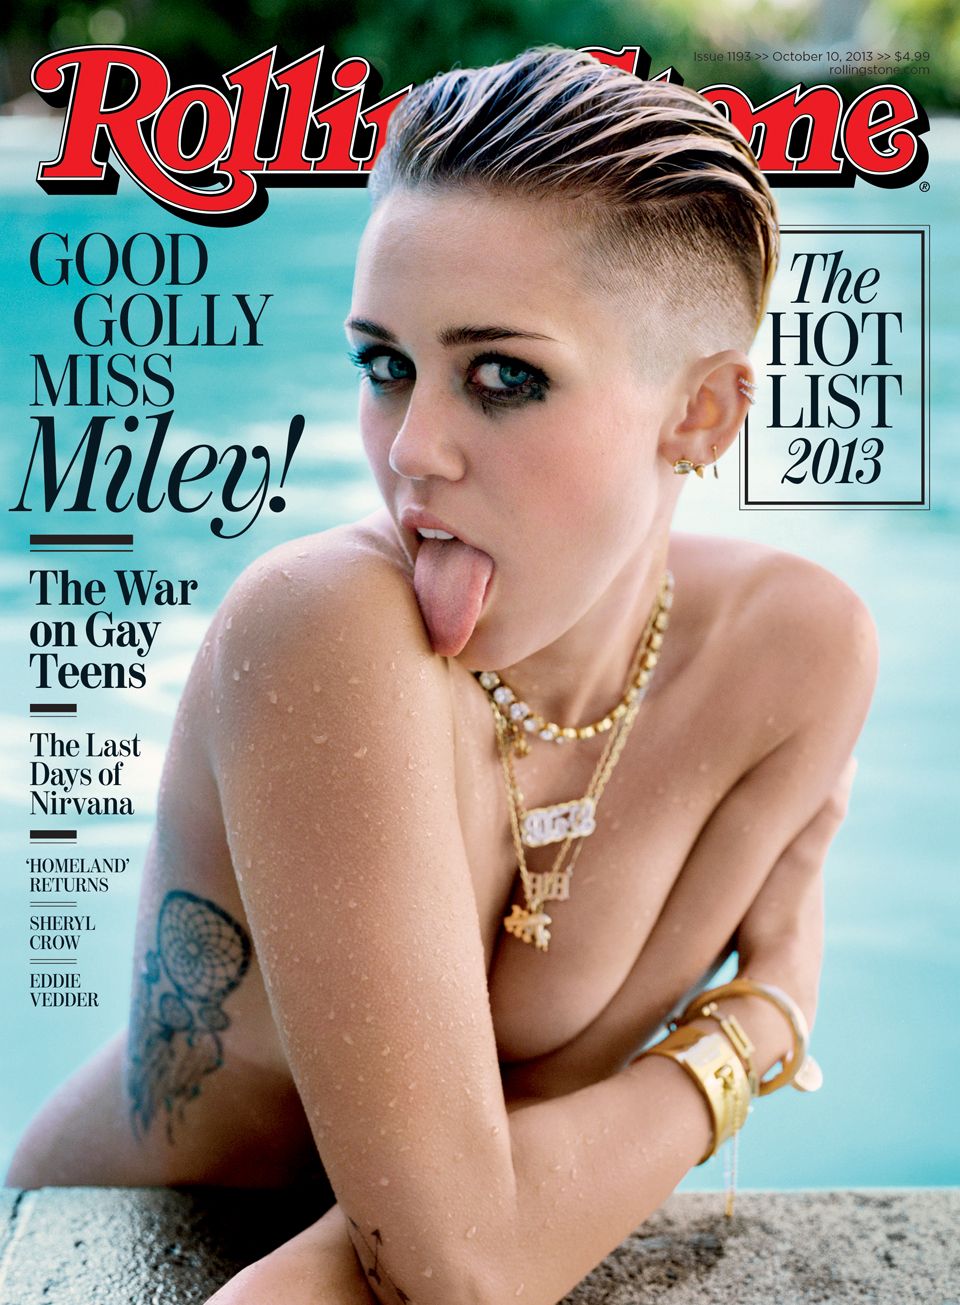 Sex Miley Cyrus Naked - Miley Cyrus poses naked for Rolling Stone